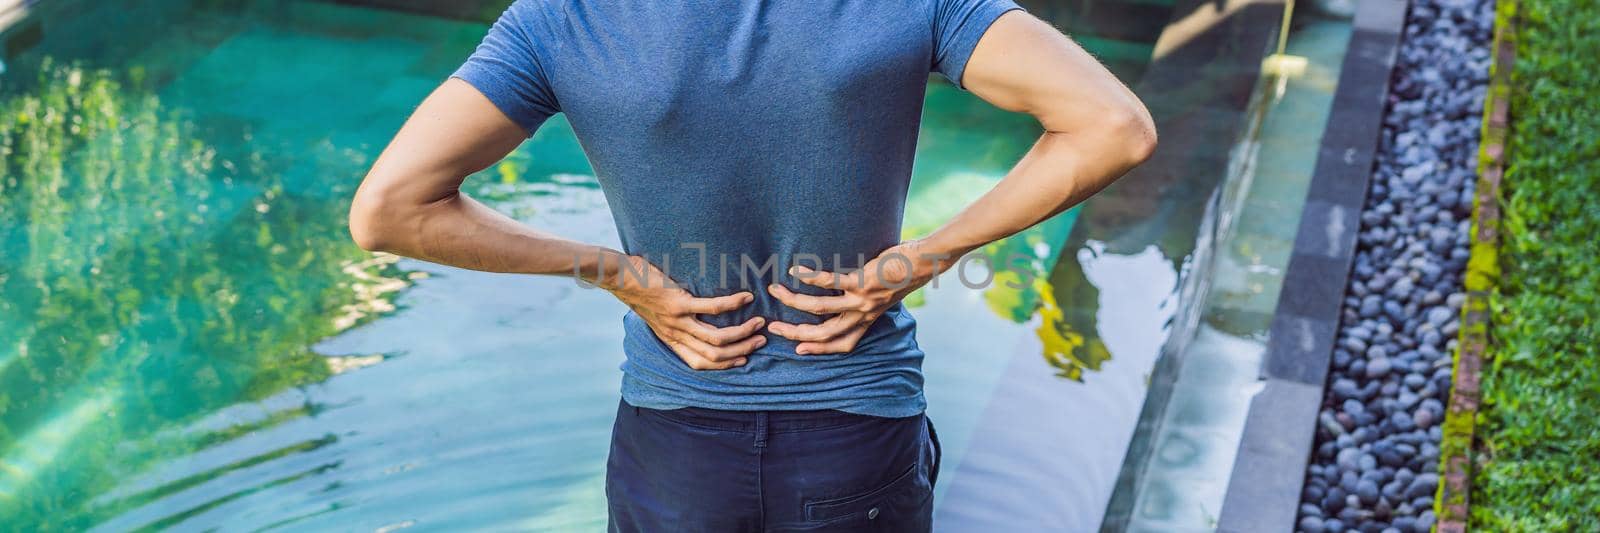 Men's back hurts against the backdrop of the pool. Pool helps with back pain. BANNER, LONG FORMAT